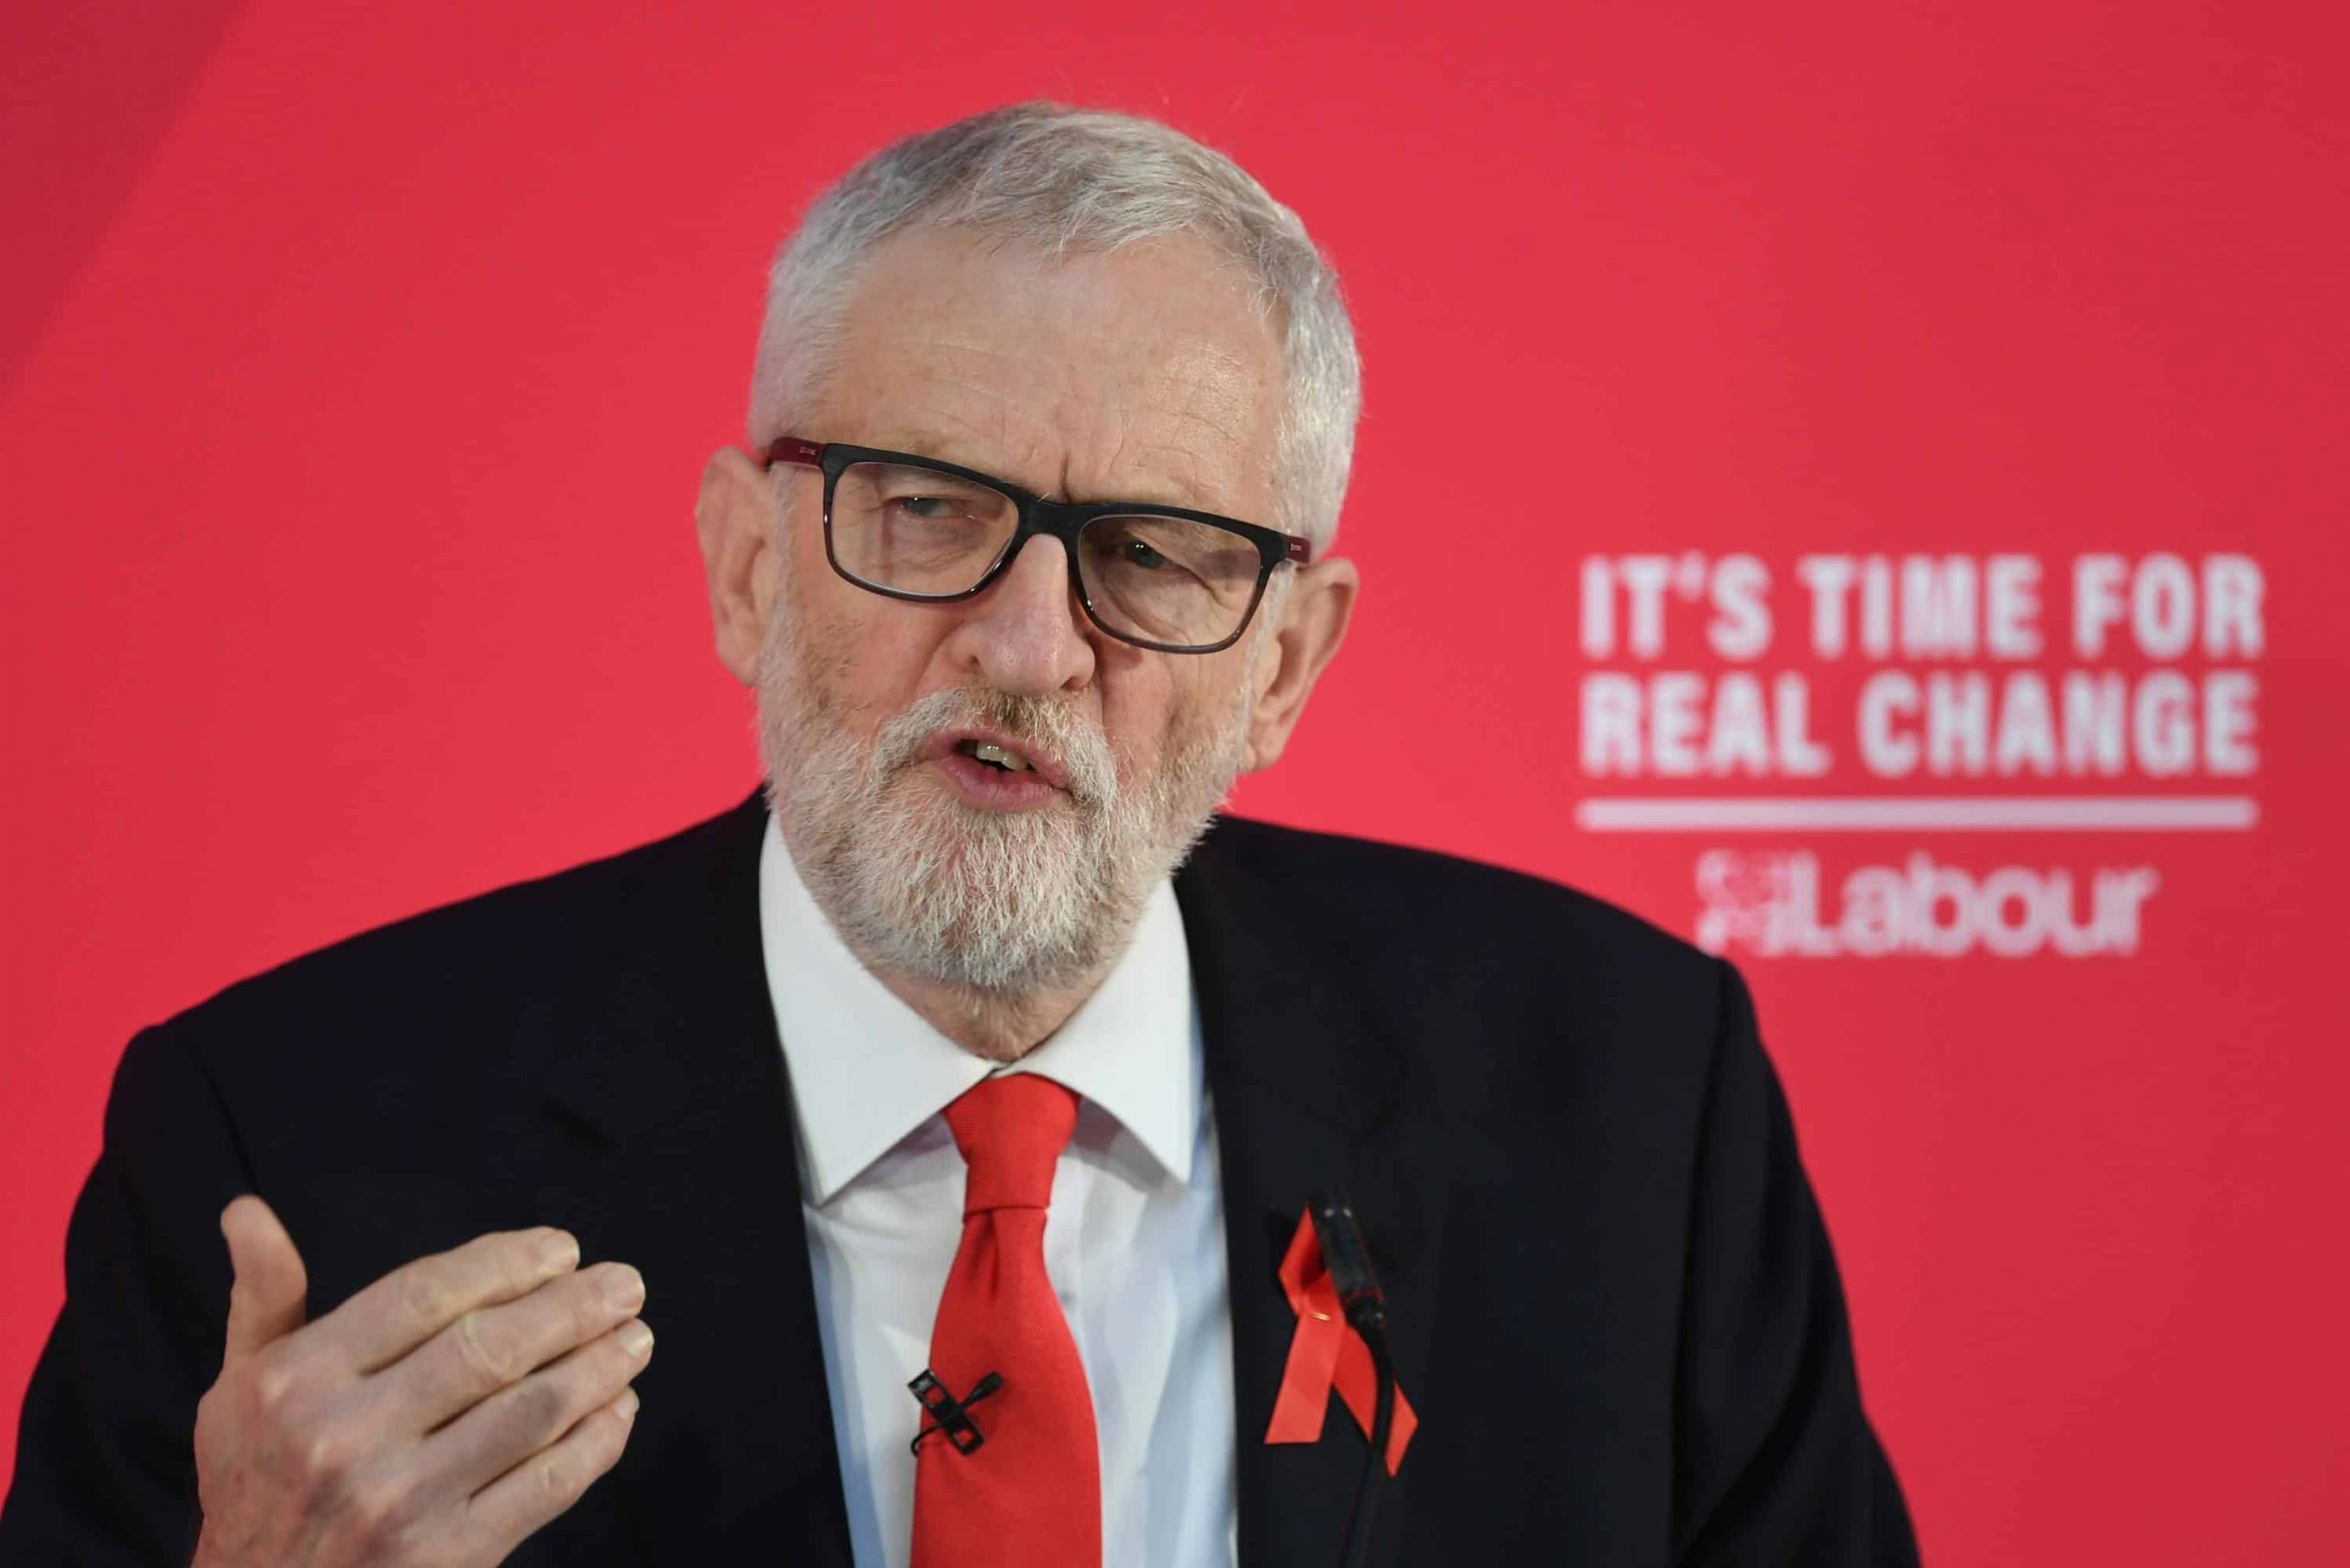 Governments can act to make terrorist attacks less likely, says Corbyn